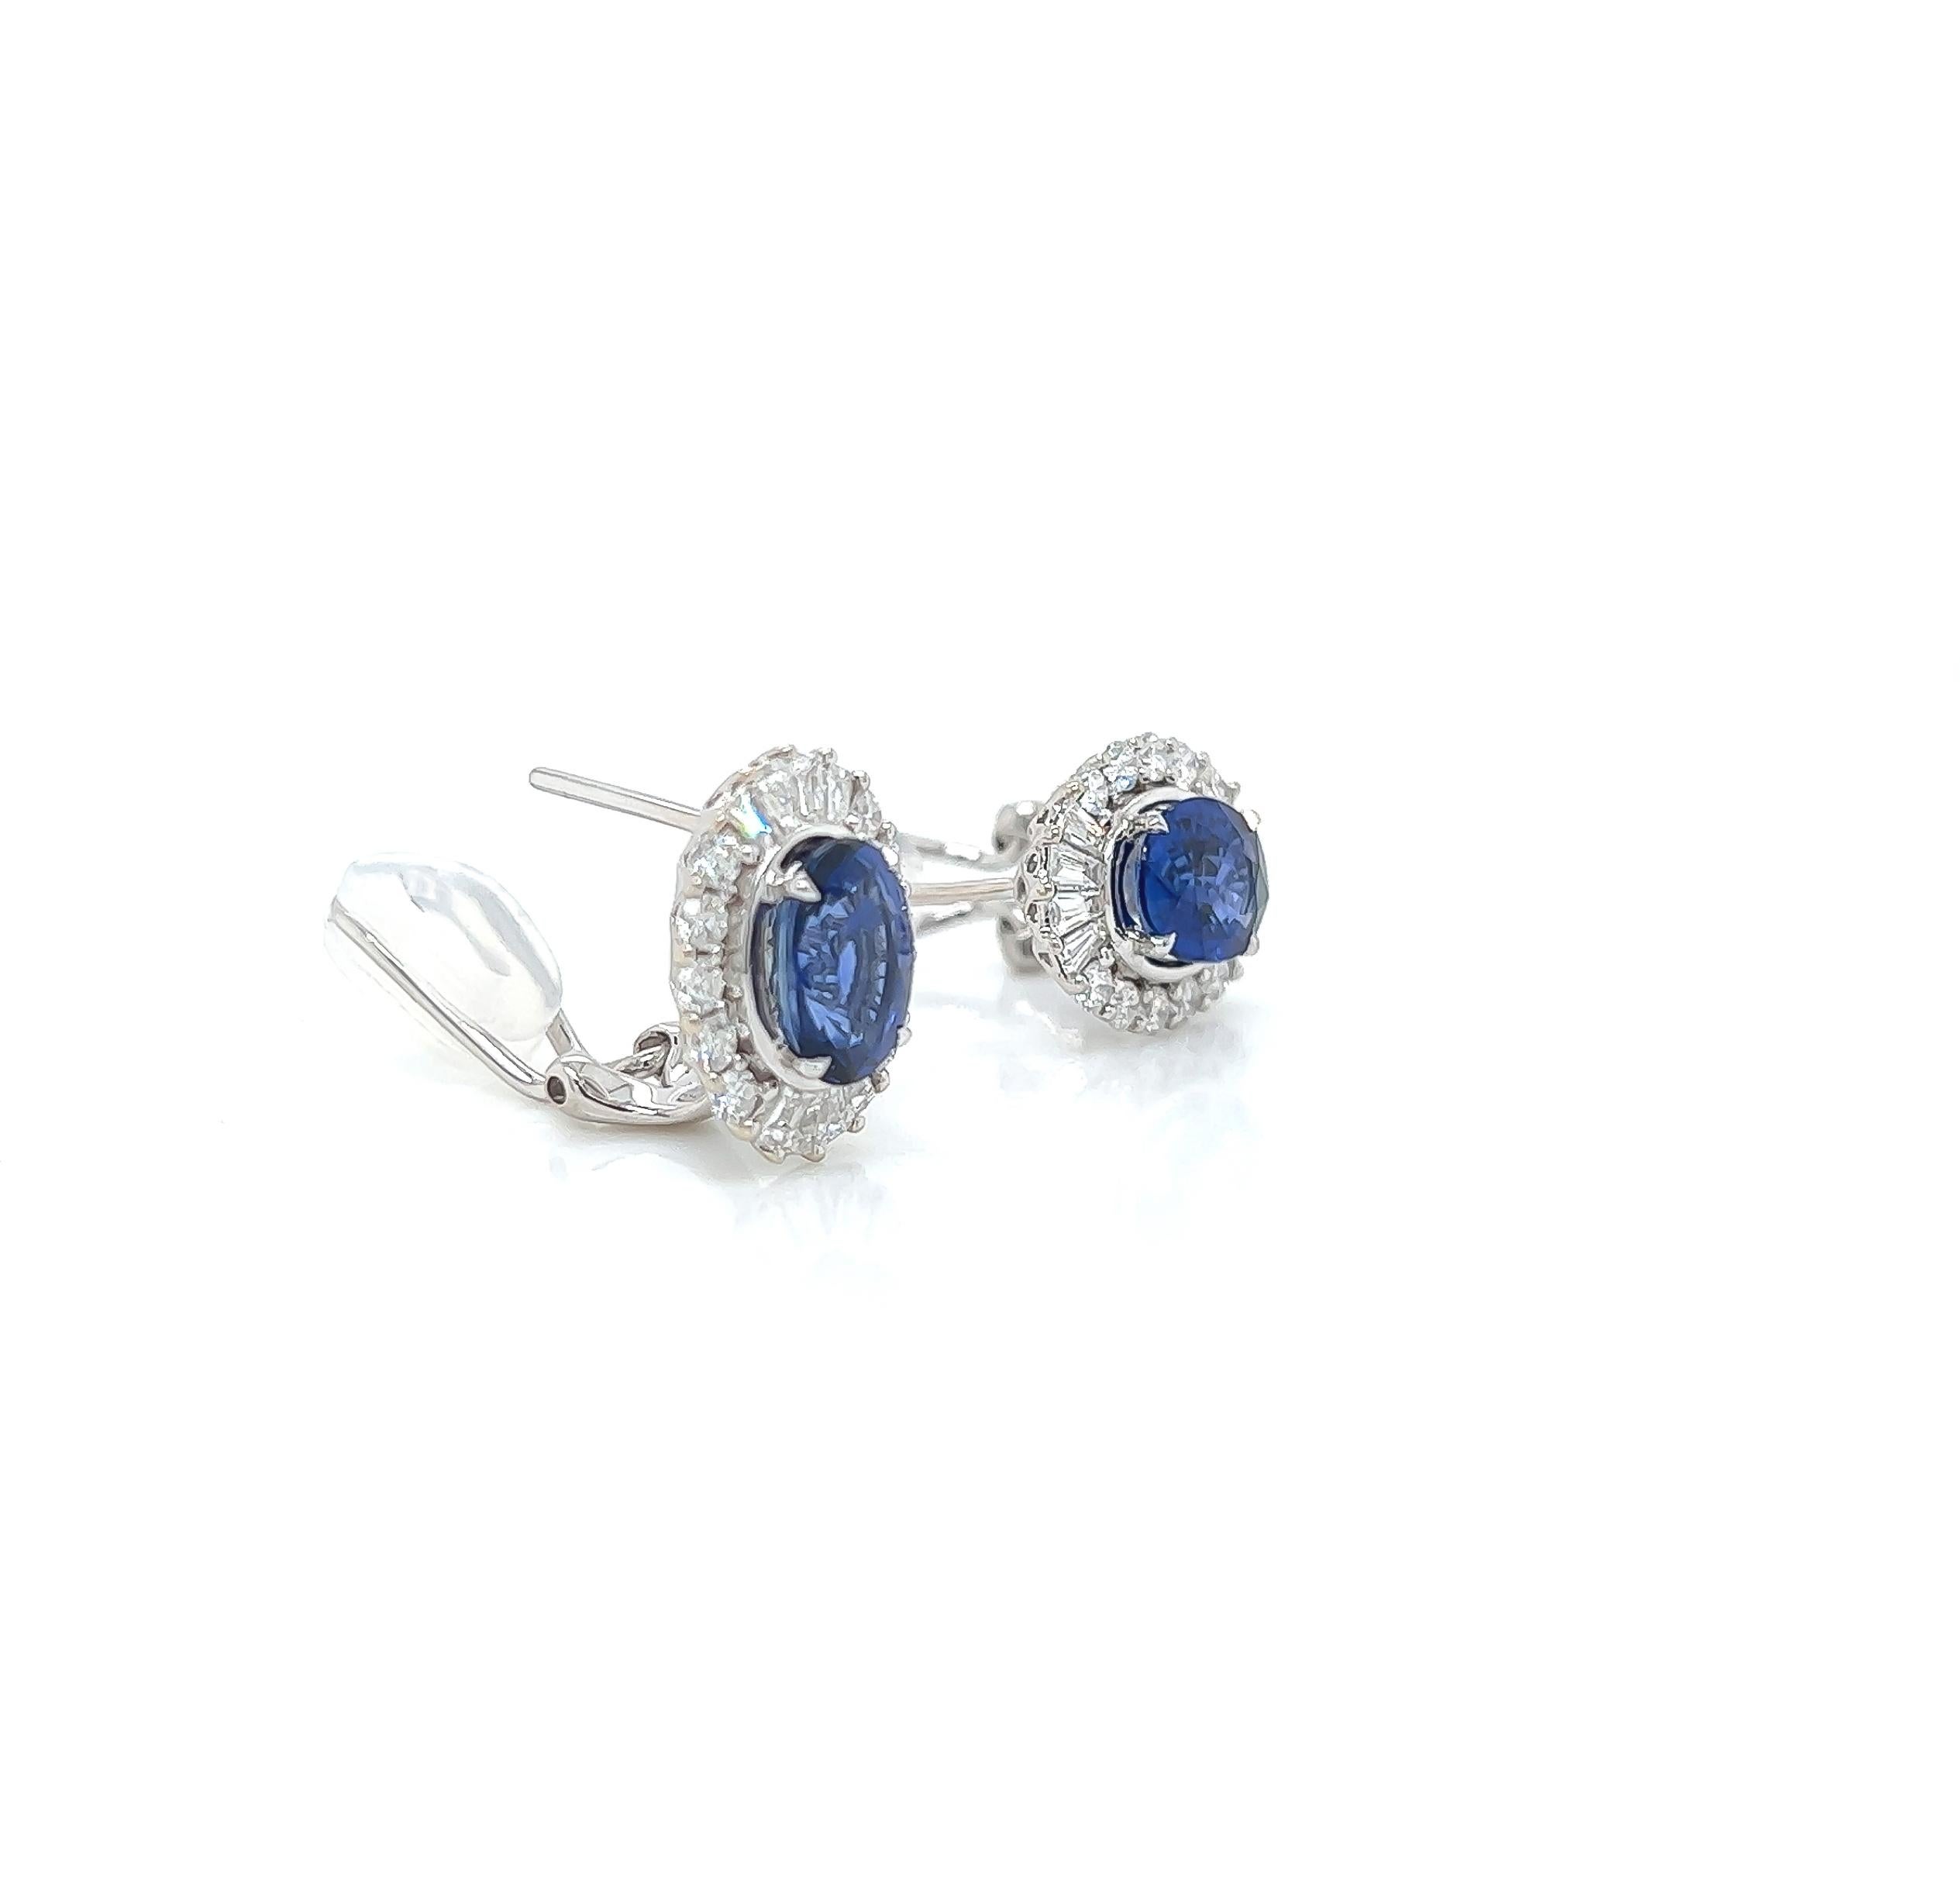 4.14 Total Carat Sapphire and Diamond Earrings in 14K White Gold

This gorgeous pair of sapphire earrings are sure to draw all eyes on you. It is created with a single 3.20 Carat Oval Sapphire, surrounded by a halo of Emerald and Round cut diamonds